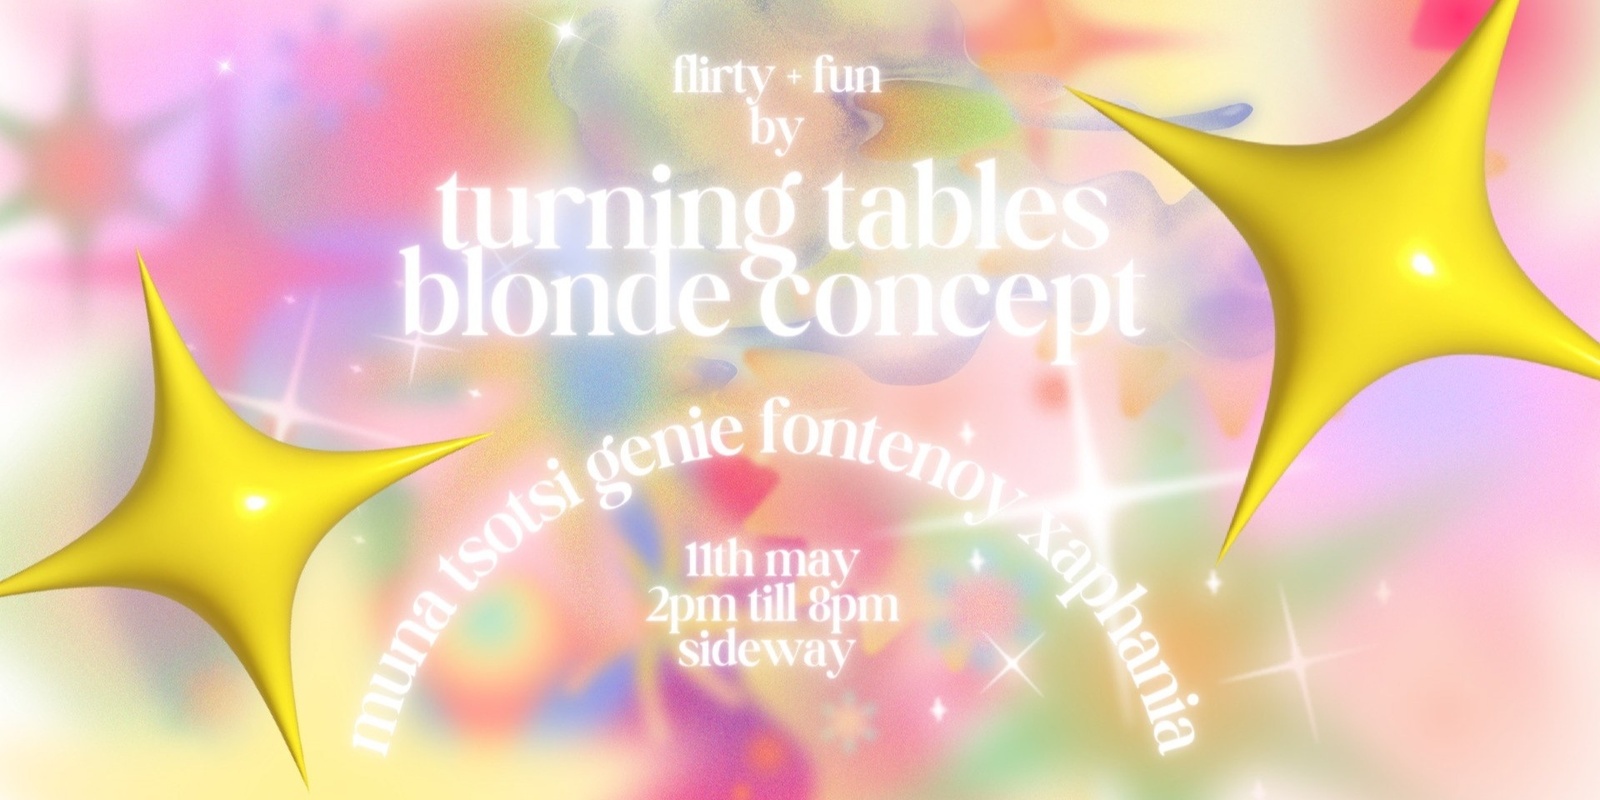 Banner image for flirty + fun by turning tables & blonde concept - day party fundraiser at sideway